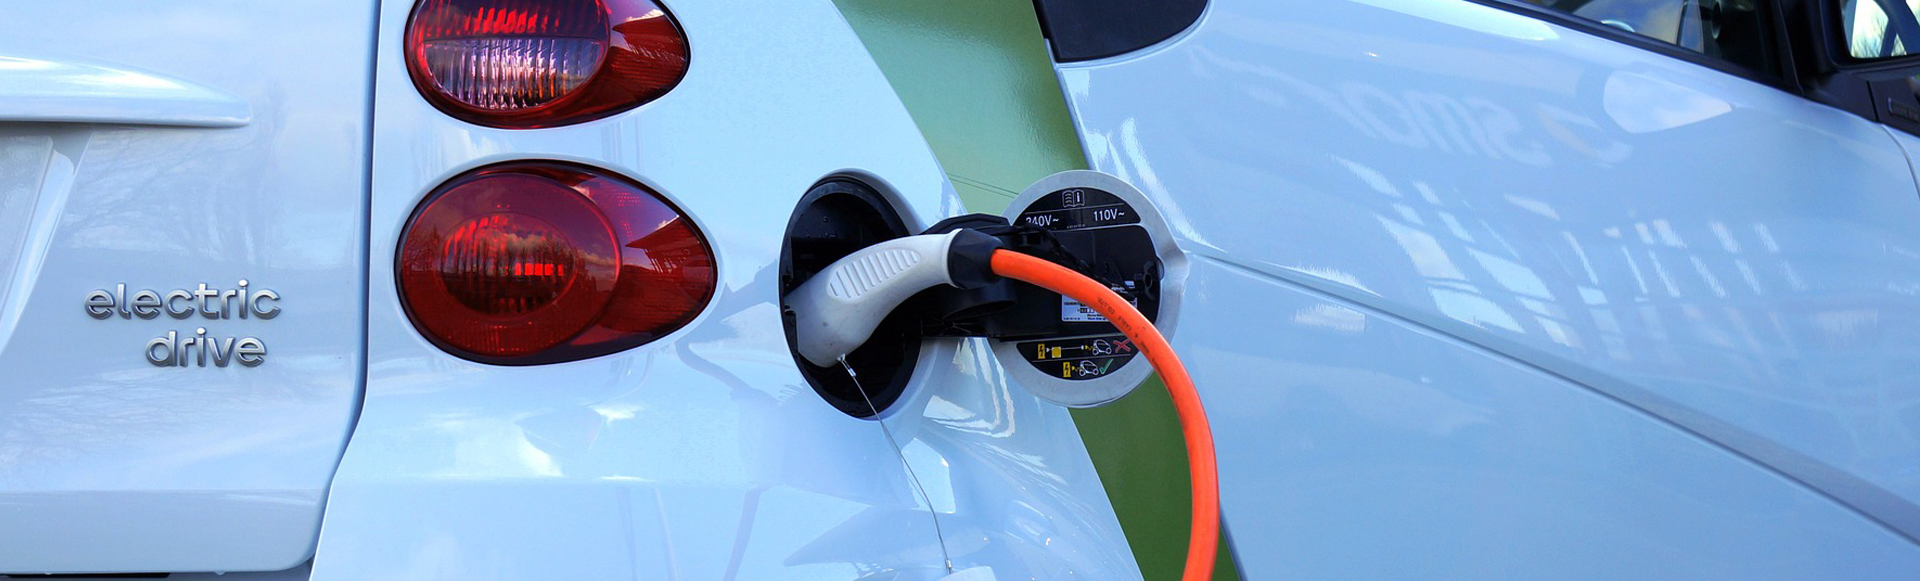 Electric Vehicle Infrastructure